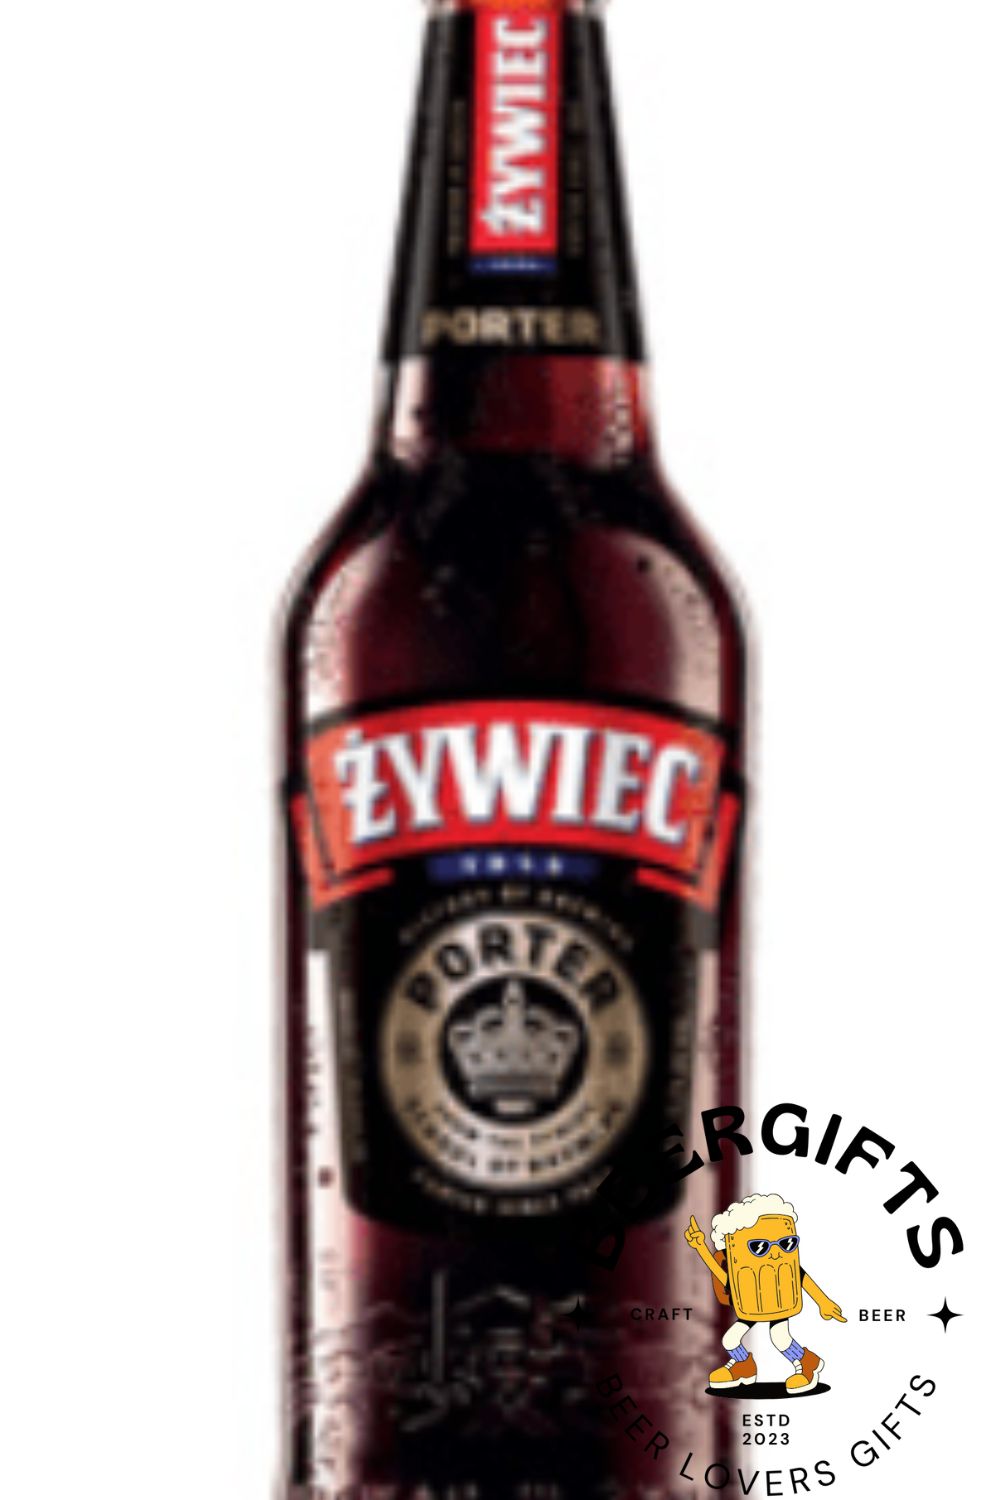 15 Best Polish Beer Brands You May Like 4